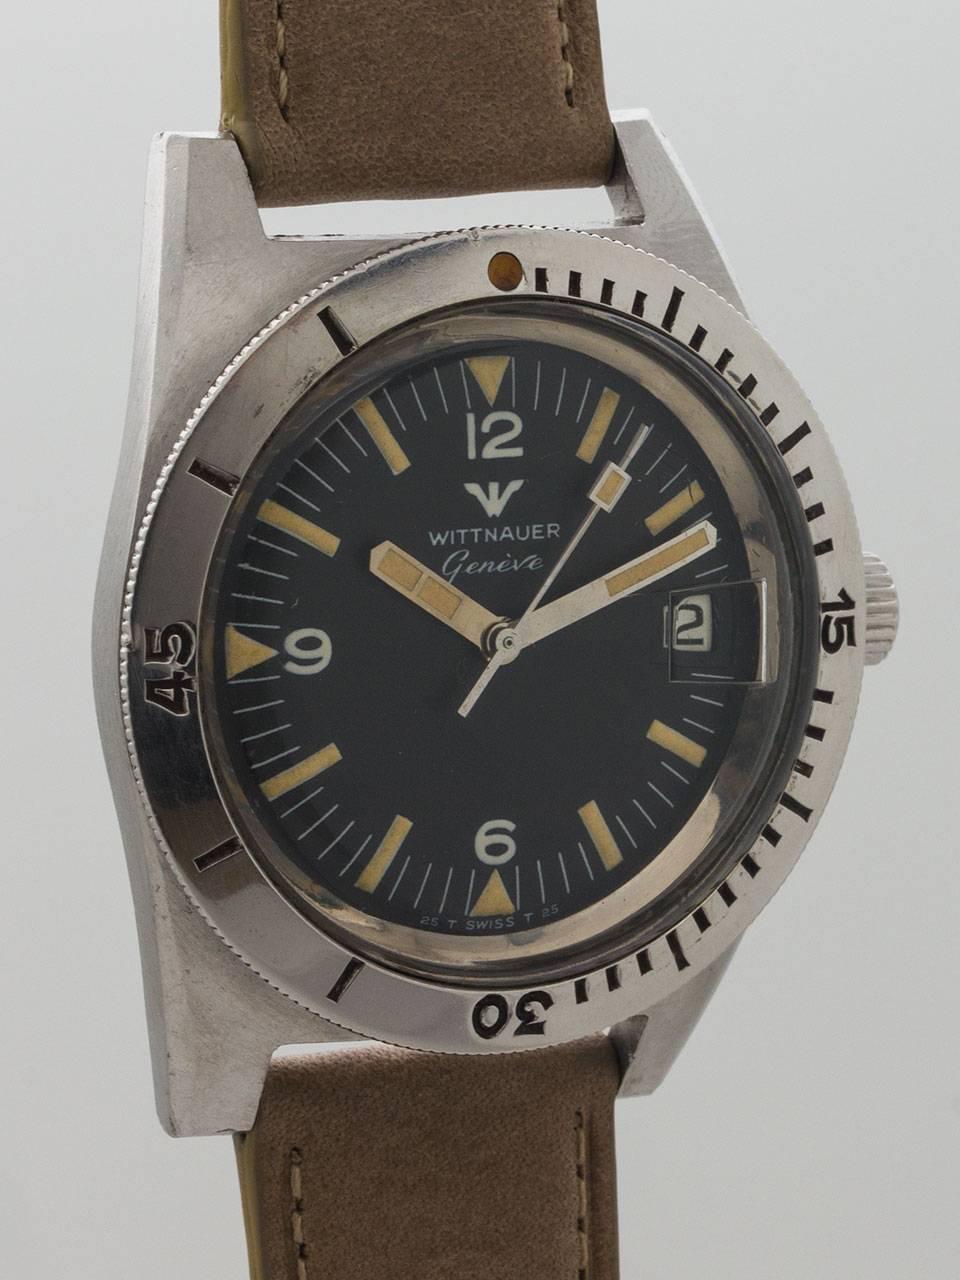 
Wittnauer Stainless Steel Diver’s circa 1960’s.  39 x 47mm case with screw down back and wide elapsed time bezel with acrylic crystal. Original matte black dial with original luminous Arabic & baton indexes and large matching luminous